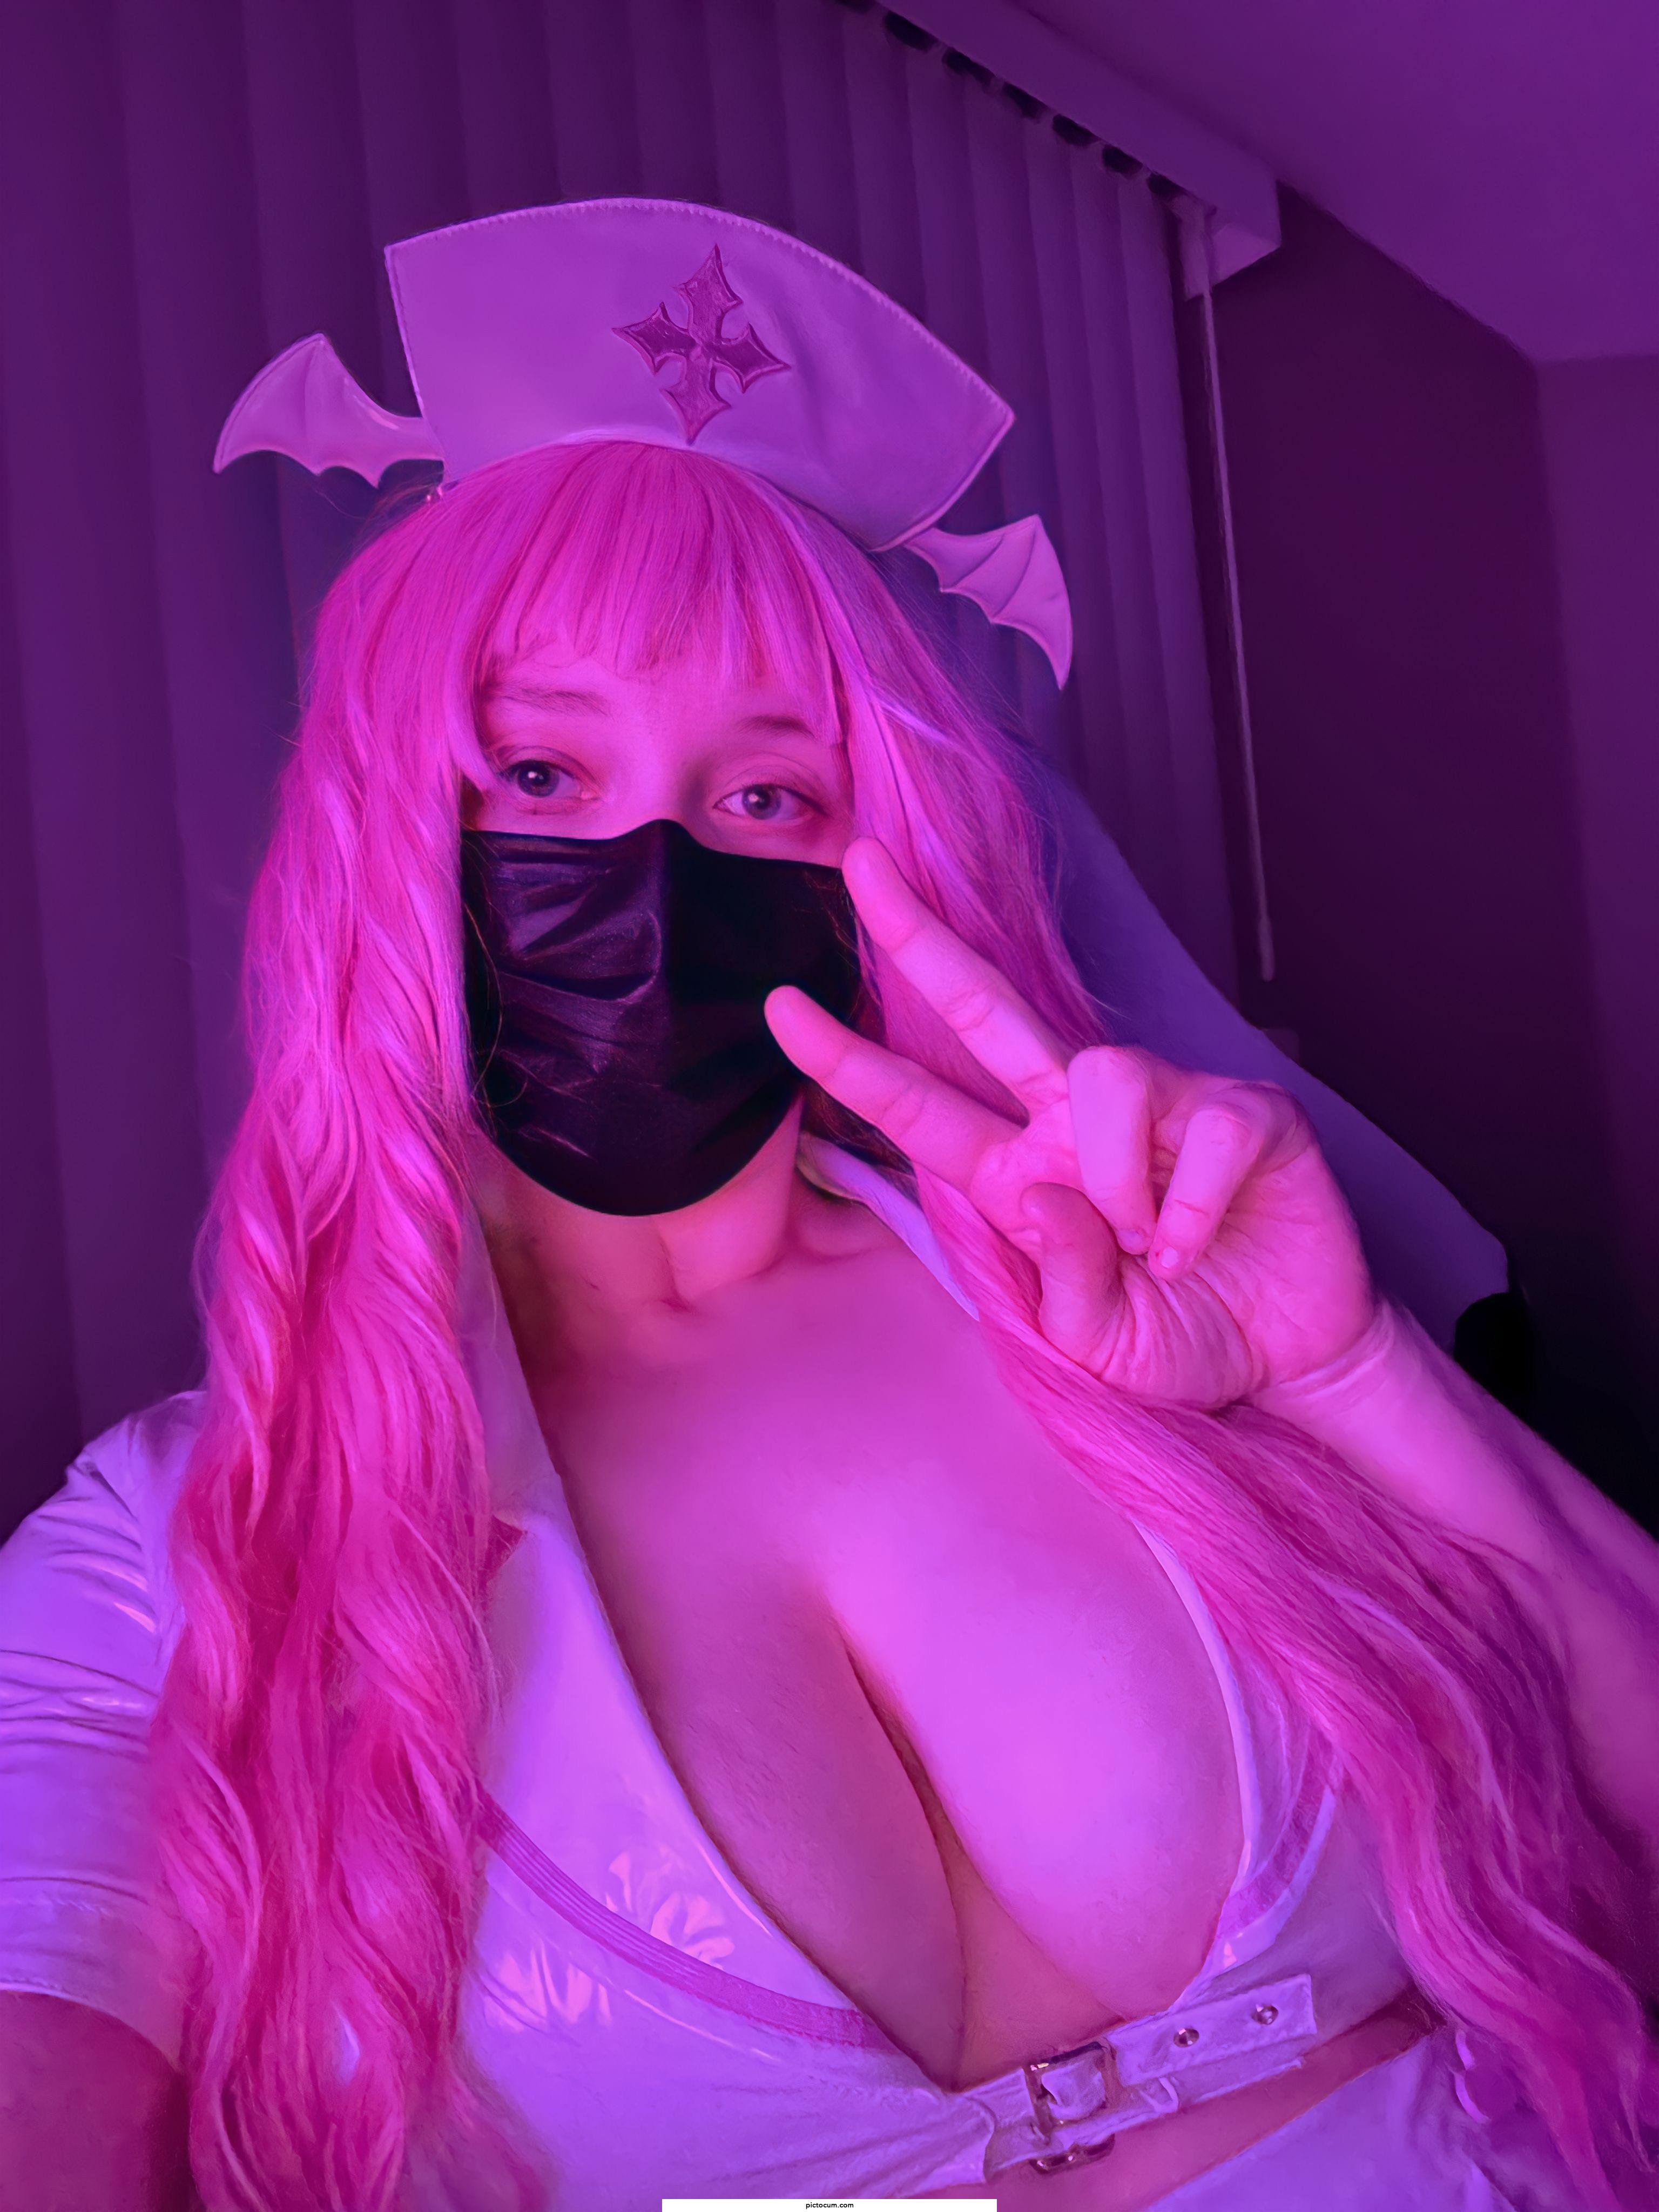 just a succubus gamer girl ready to suc u 🤭🤭